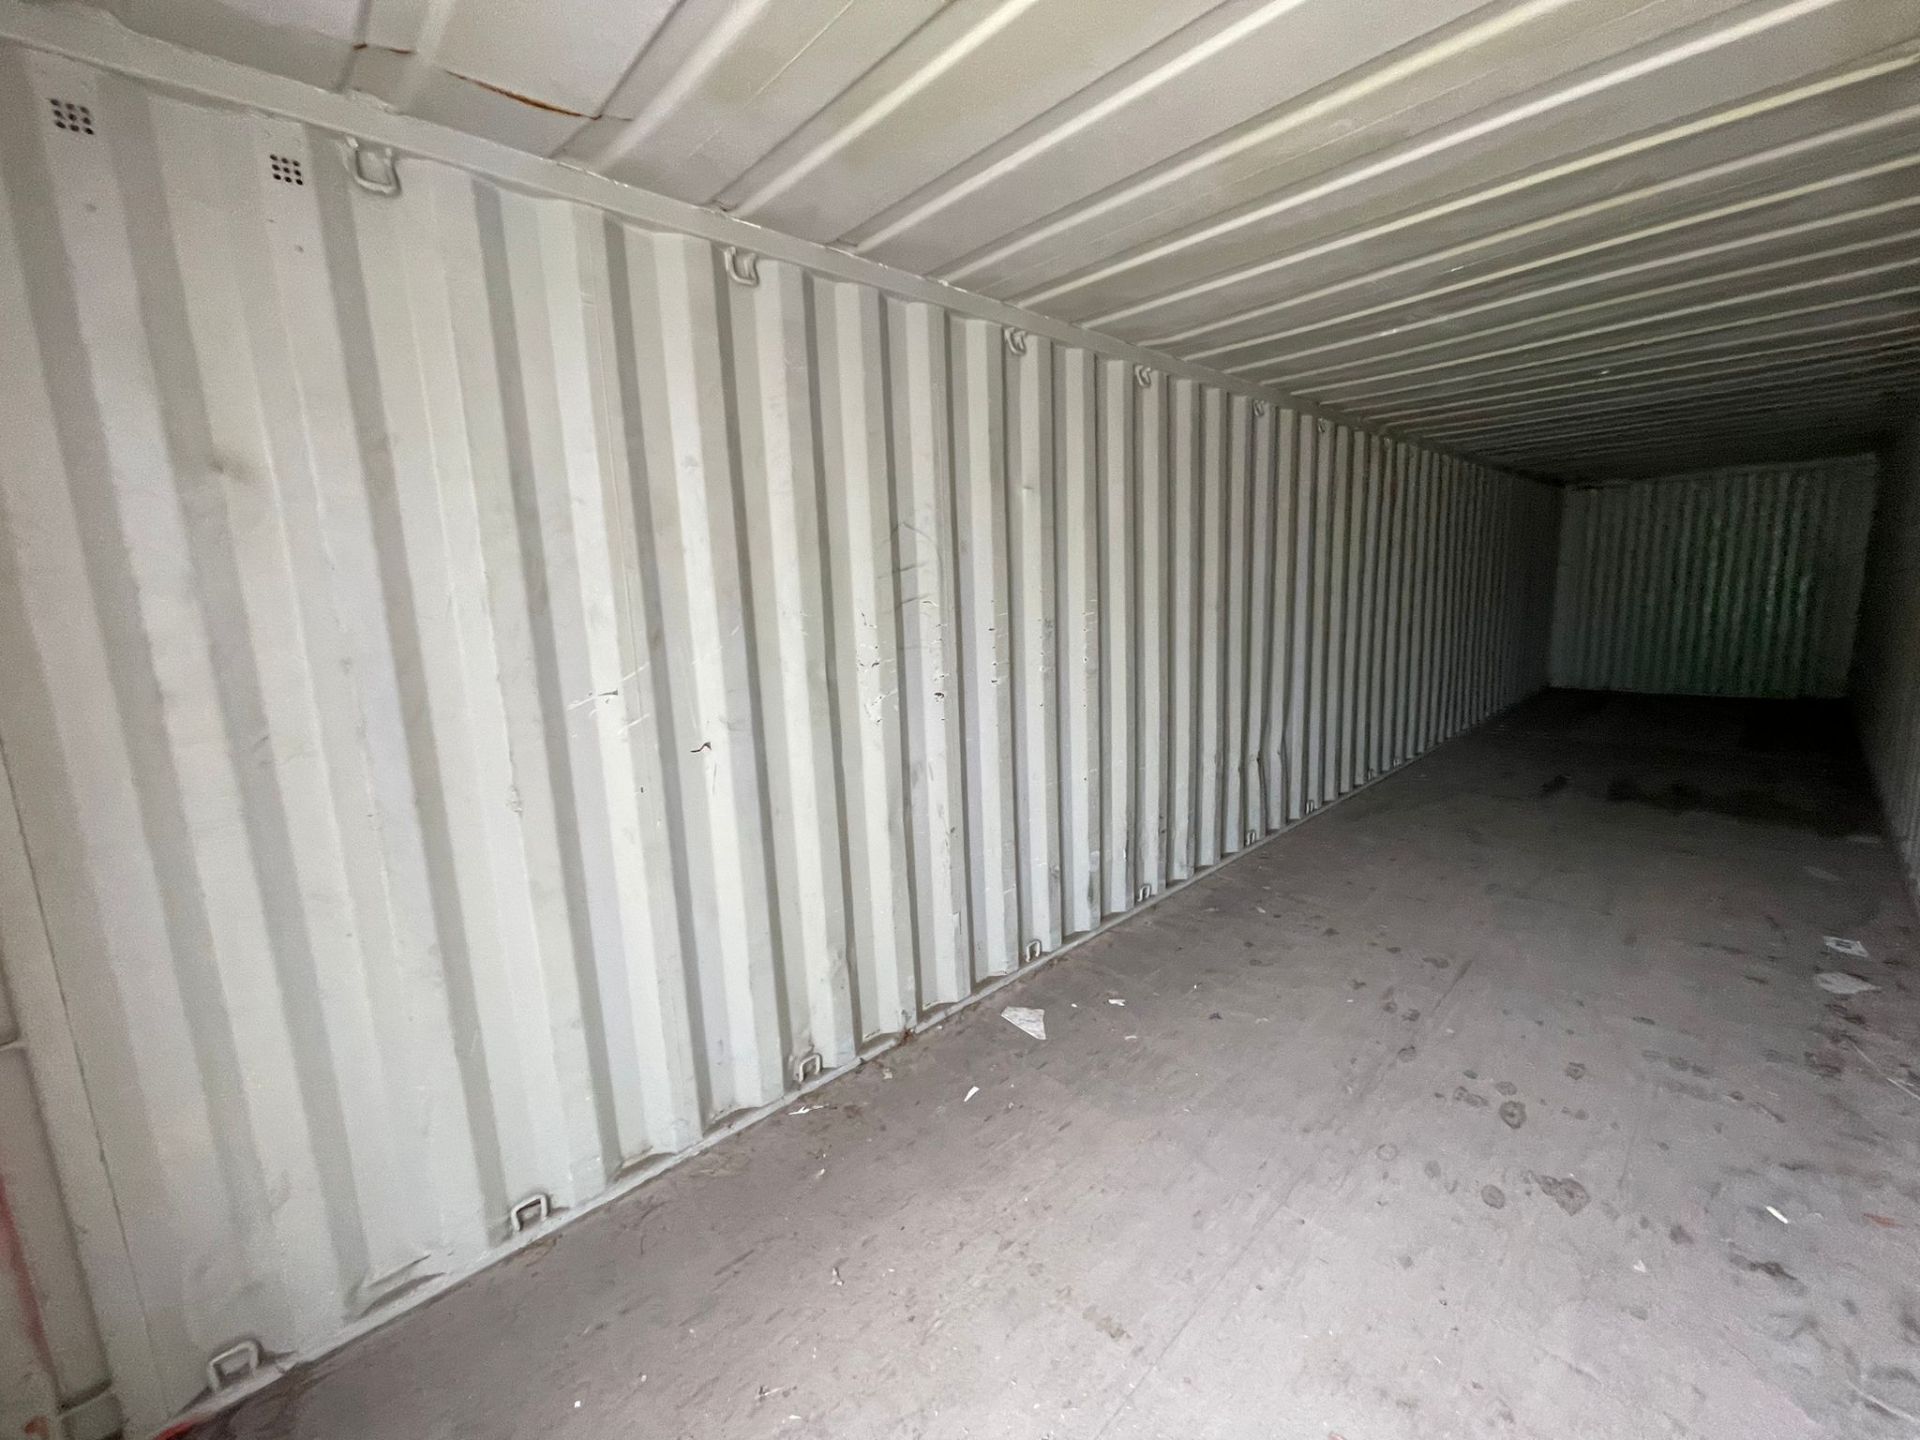 Shipping Container - ref 4634553 - NO RESERVE (40’ GP - Standard) - Image 3 of 4